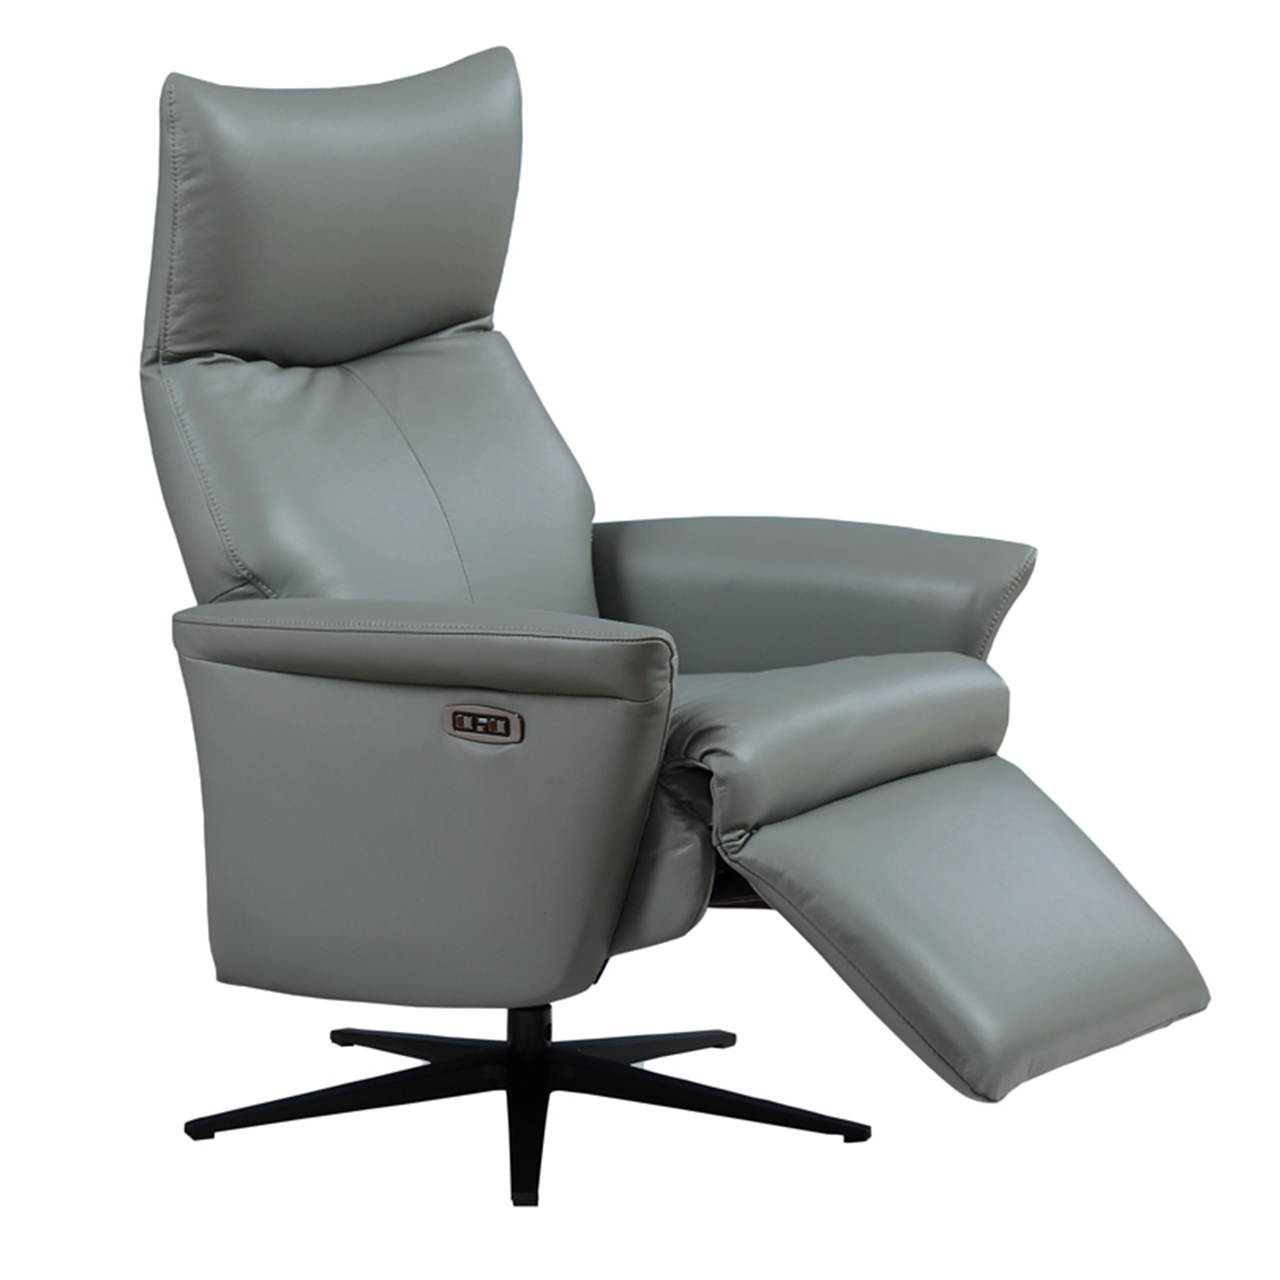 Electric Leather Reclining Chair